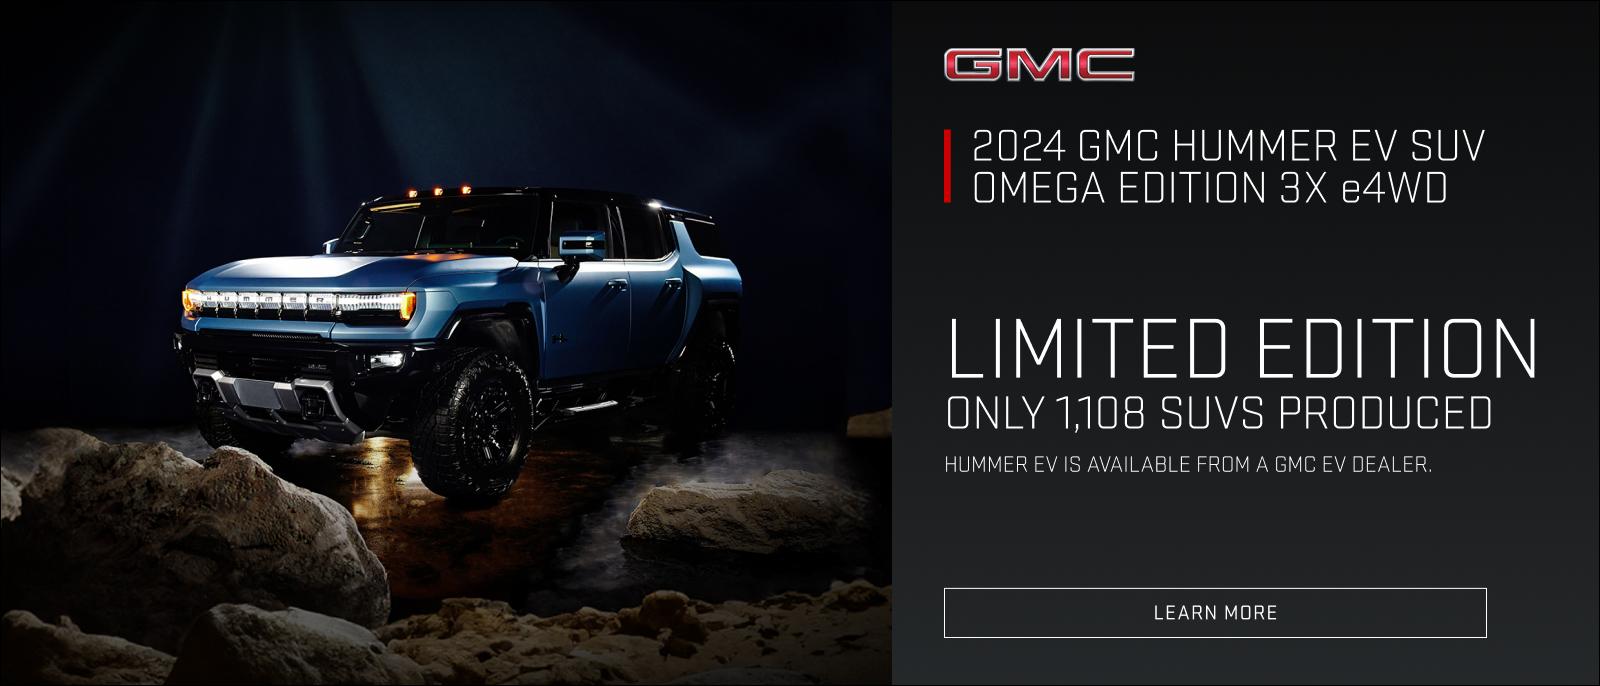 LIMITED EDITION

LIMITED TO 1,108 PICKUPS PRODUCED